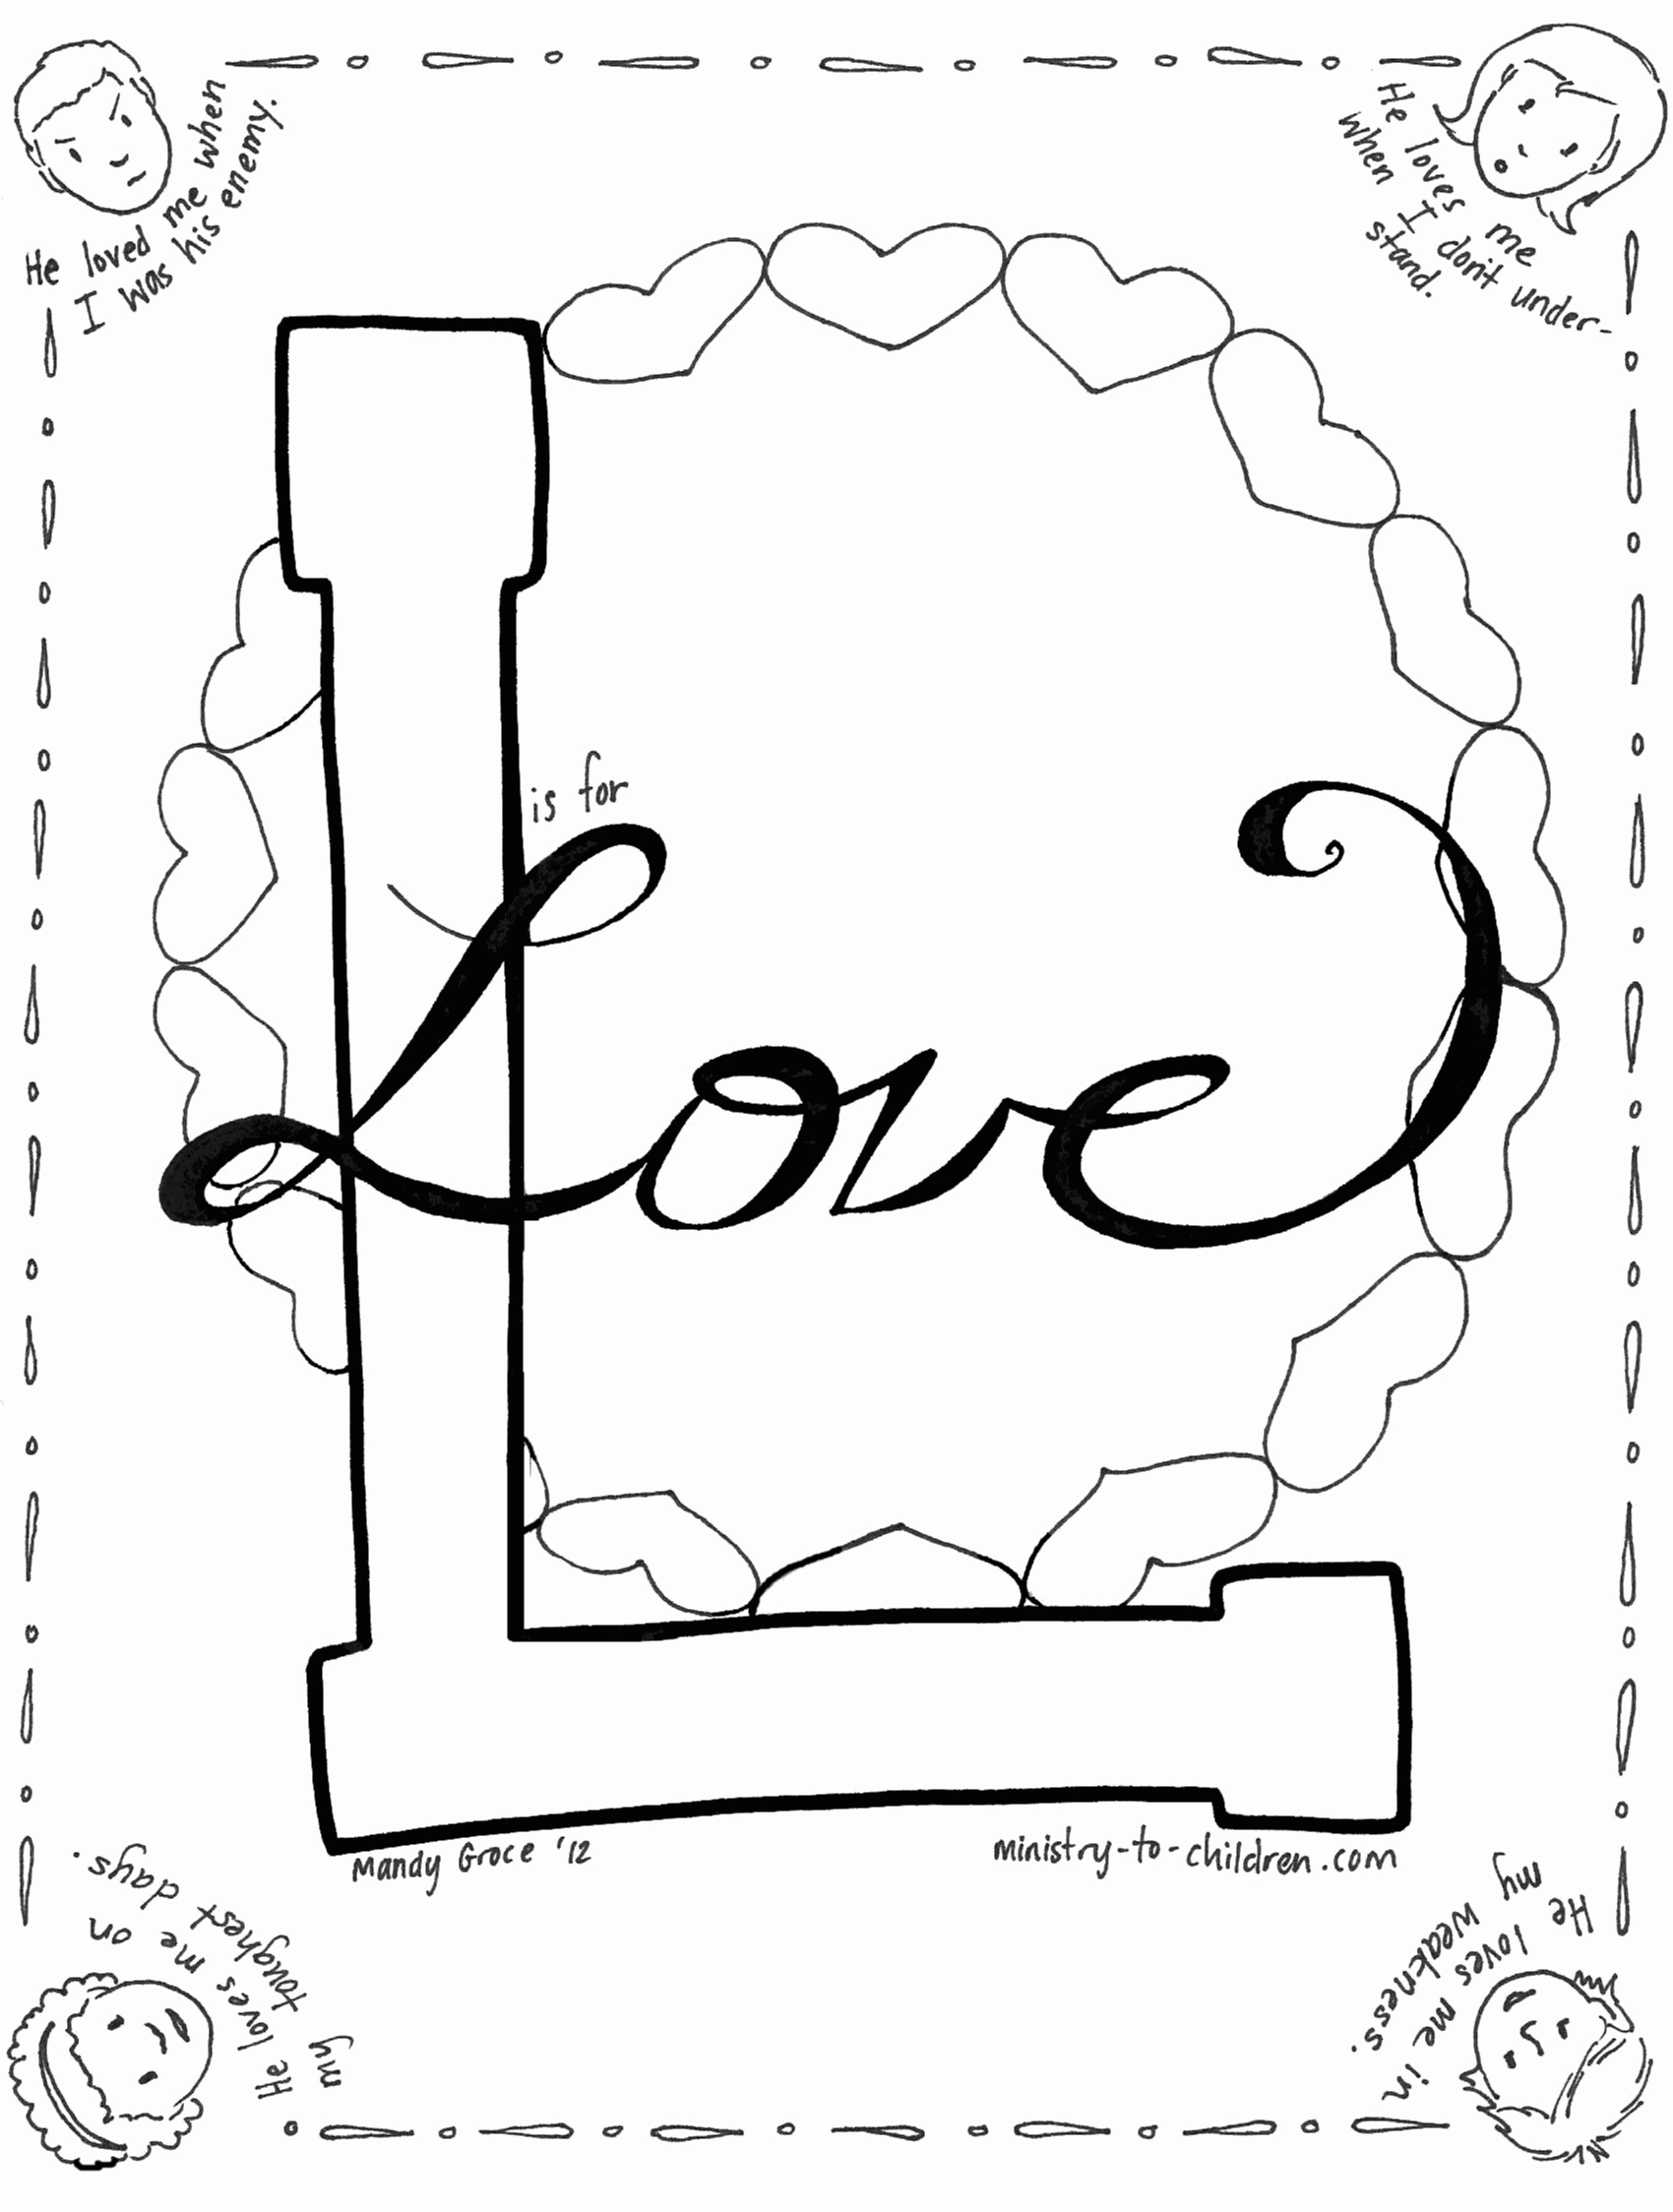 About True Love Coloring Pages | Coloring Pages For All Ages